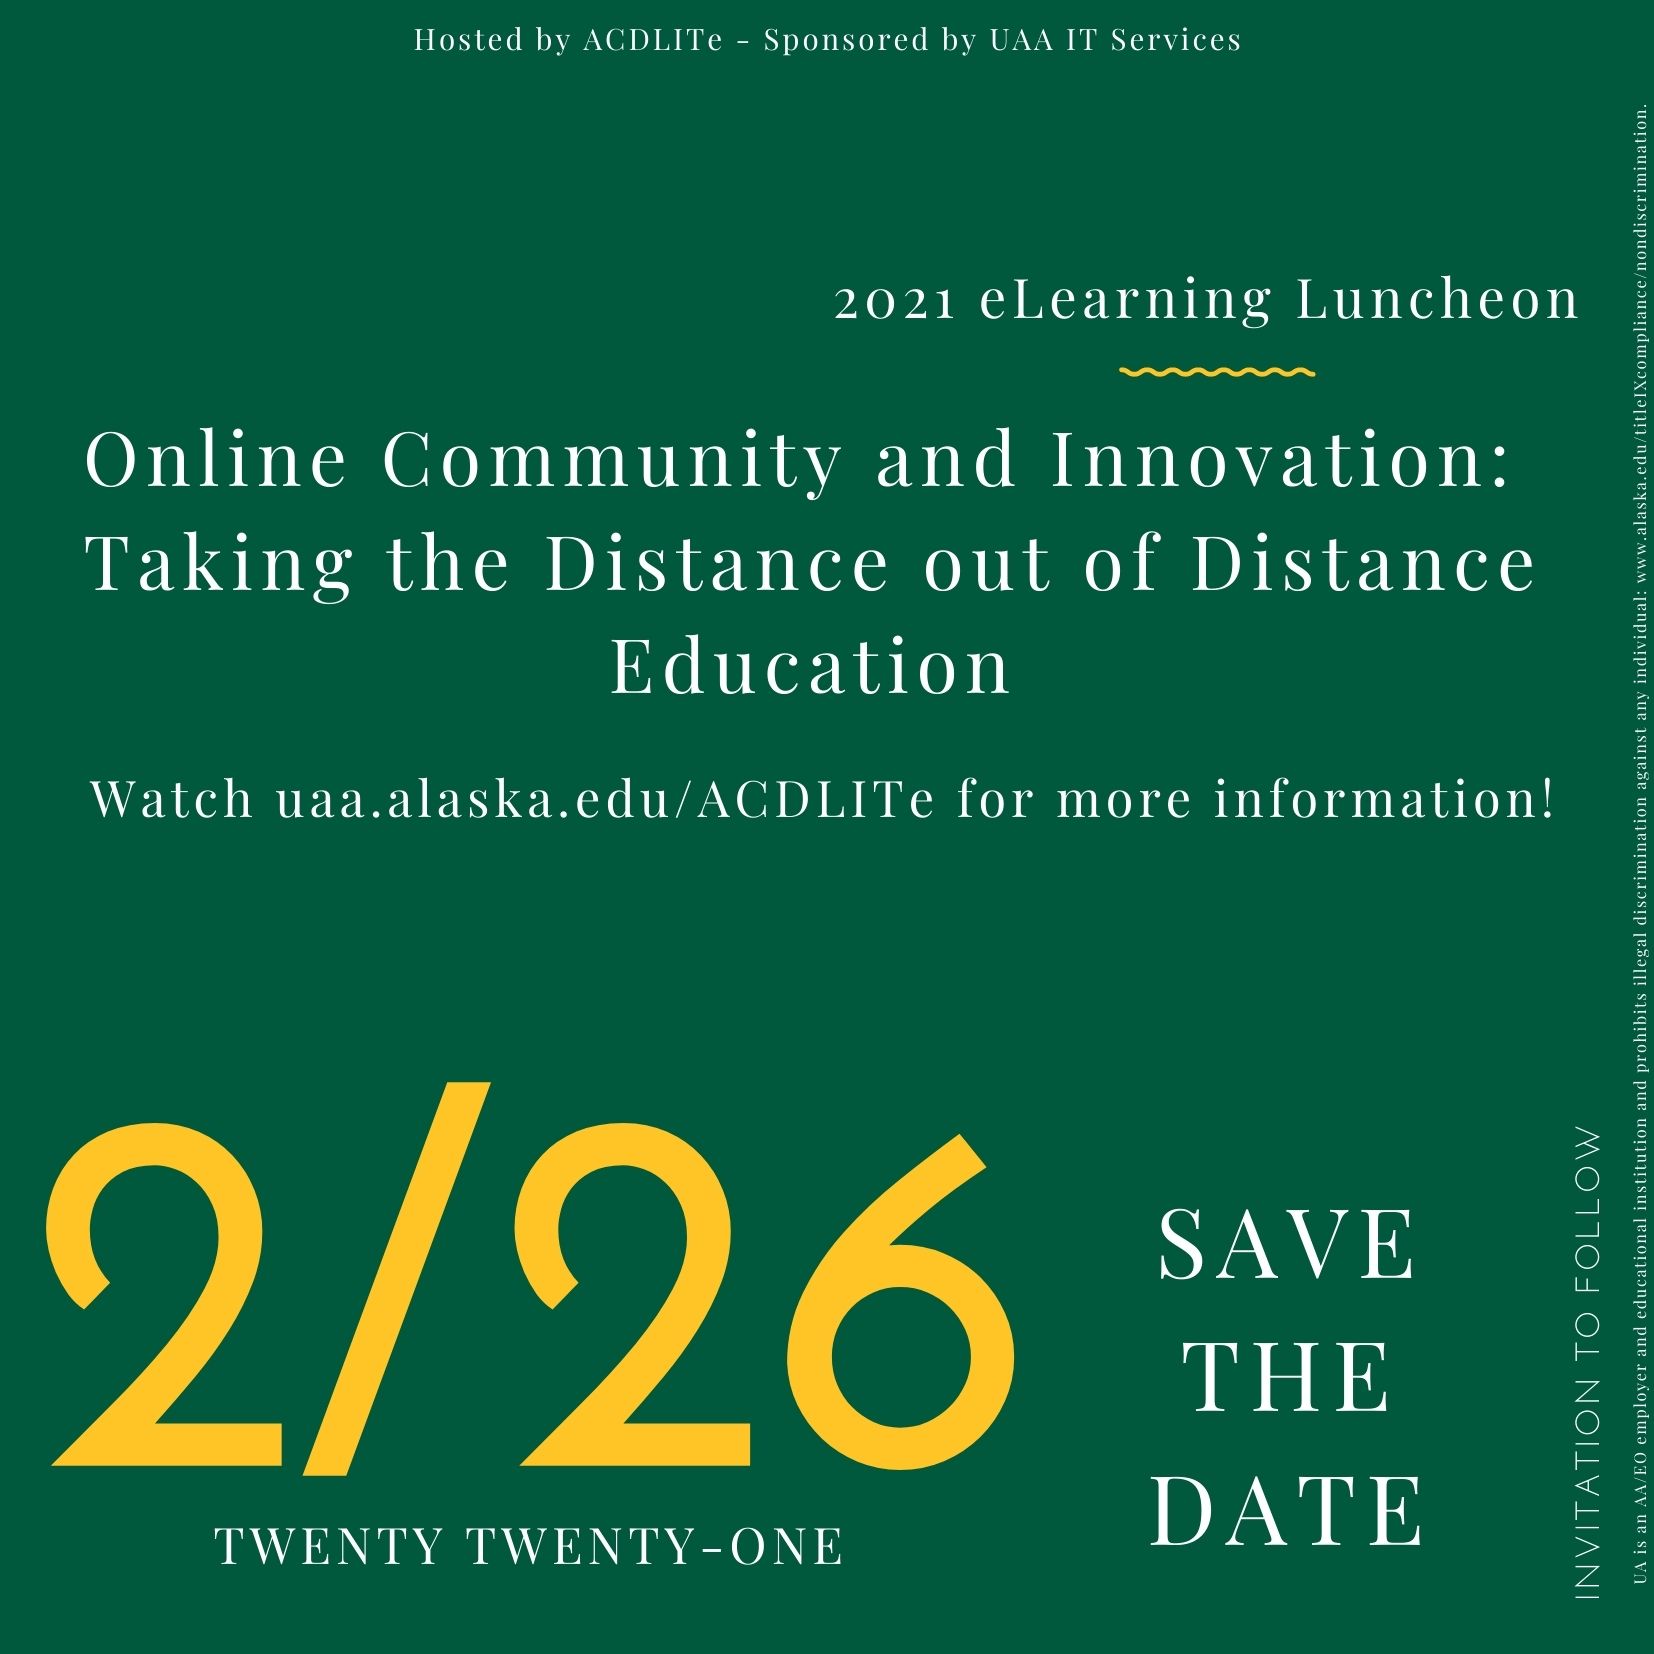 SAVE THE DATE  2021 eLearning Luncheon Online Community and Innovation: Taking the Distance out of Distance Education February 26, 2021  Watch uaa.alaska.edu/ACDLITe for more information! Hosted by ACDLITe - Sponsored by UAA IT Services  invitation to follow  UA is an AA/EO employer and educational institution and prohibits illegal discrimination against any individual: www.alaska.edu/titleIXcompliance/nondiscrimination.